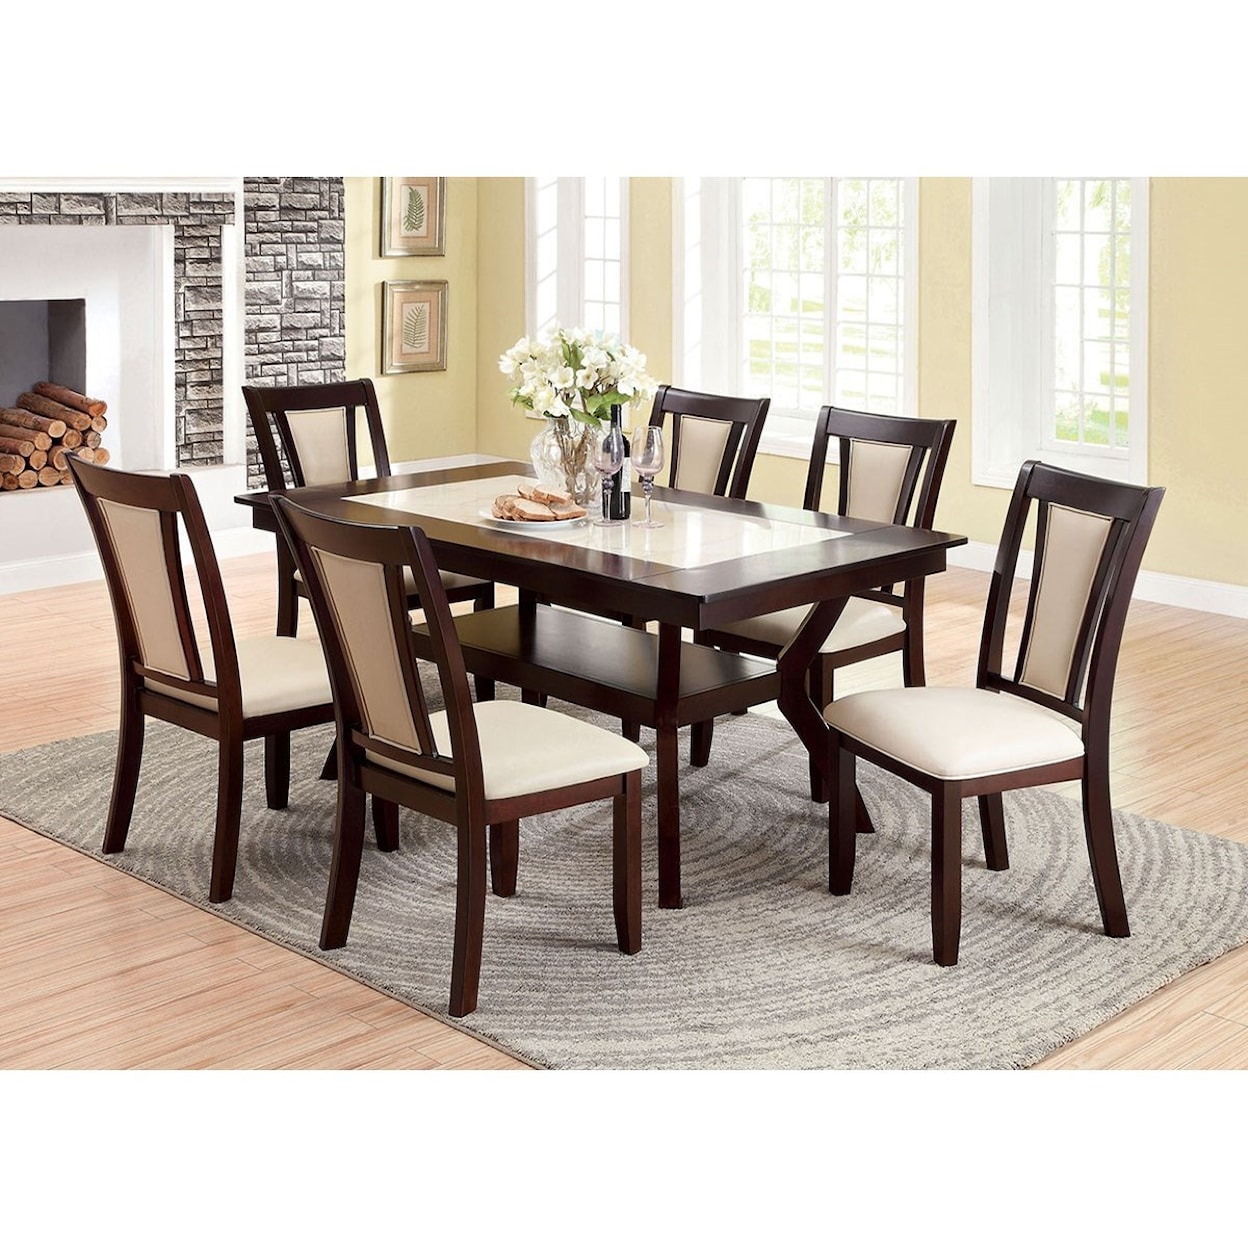 Furniture of America Brent Dining Table with Faux Marble Insert